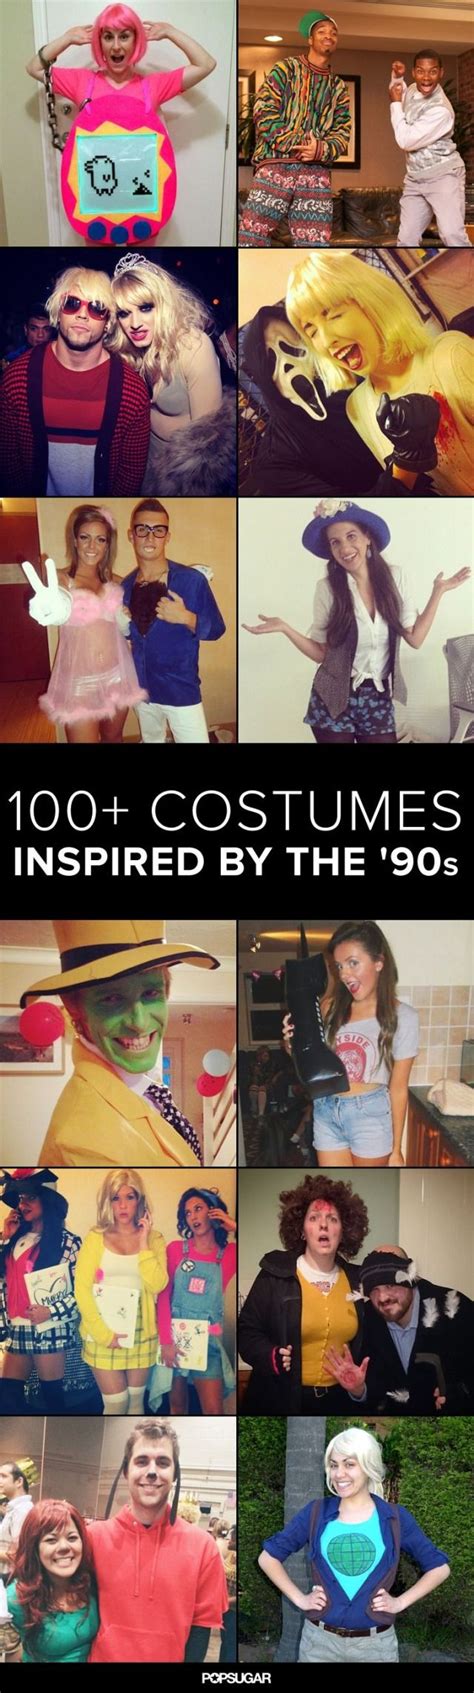 100 Totally Rad Halloween Costume Ideas Inspired By The